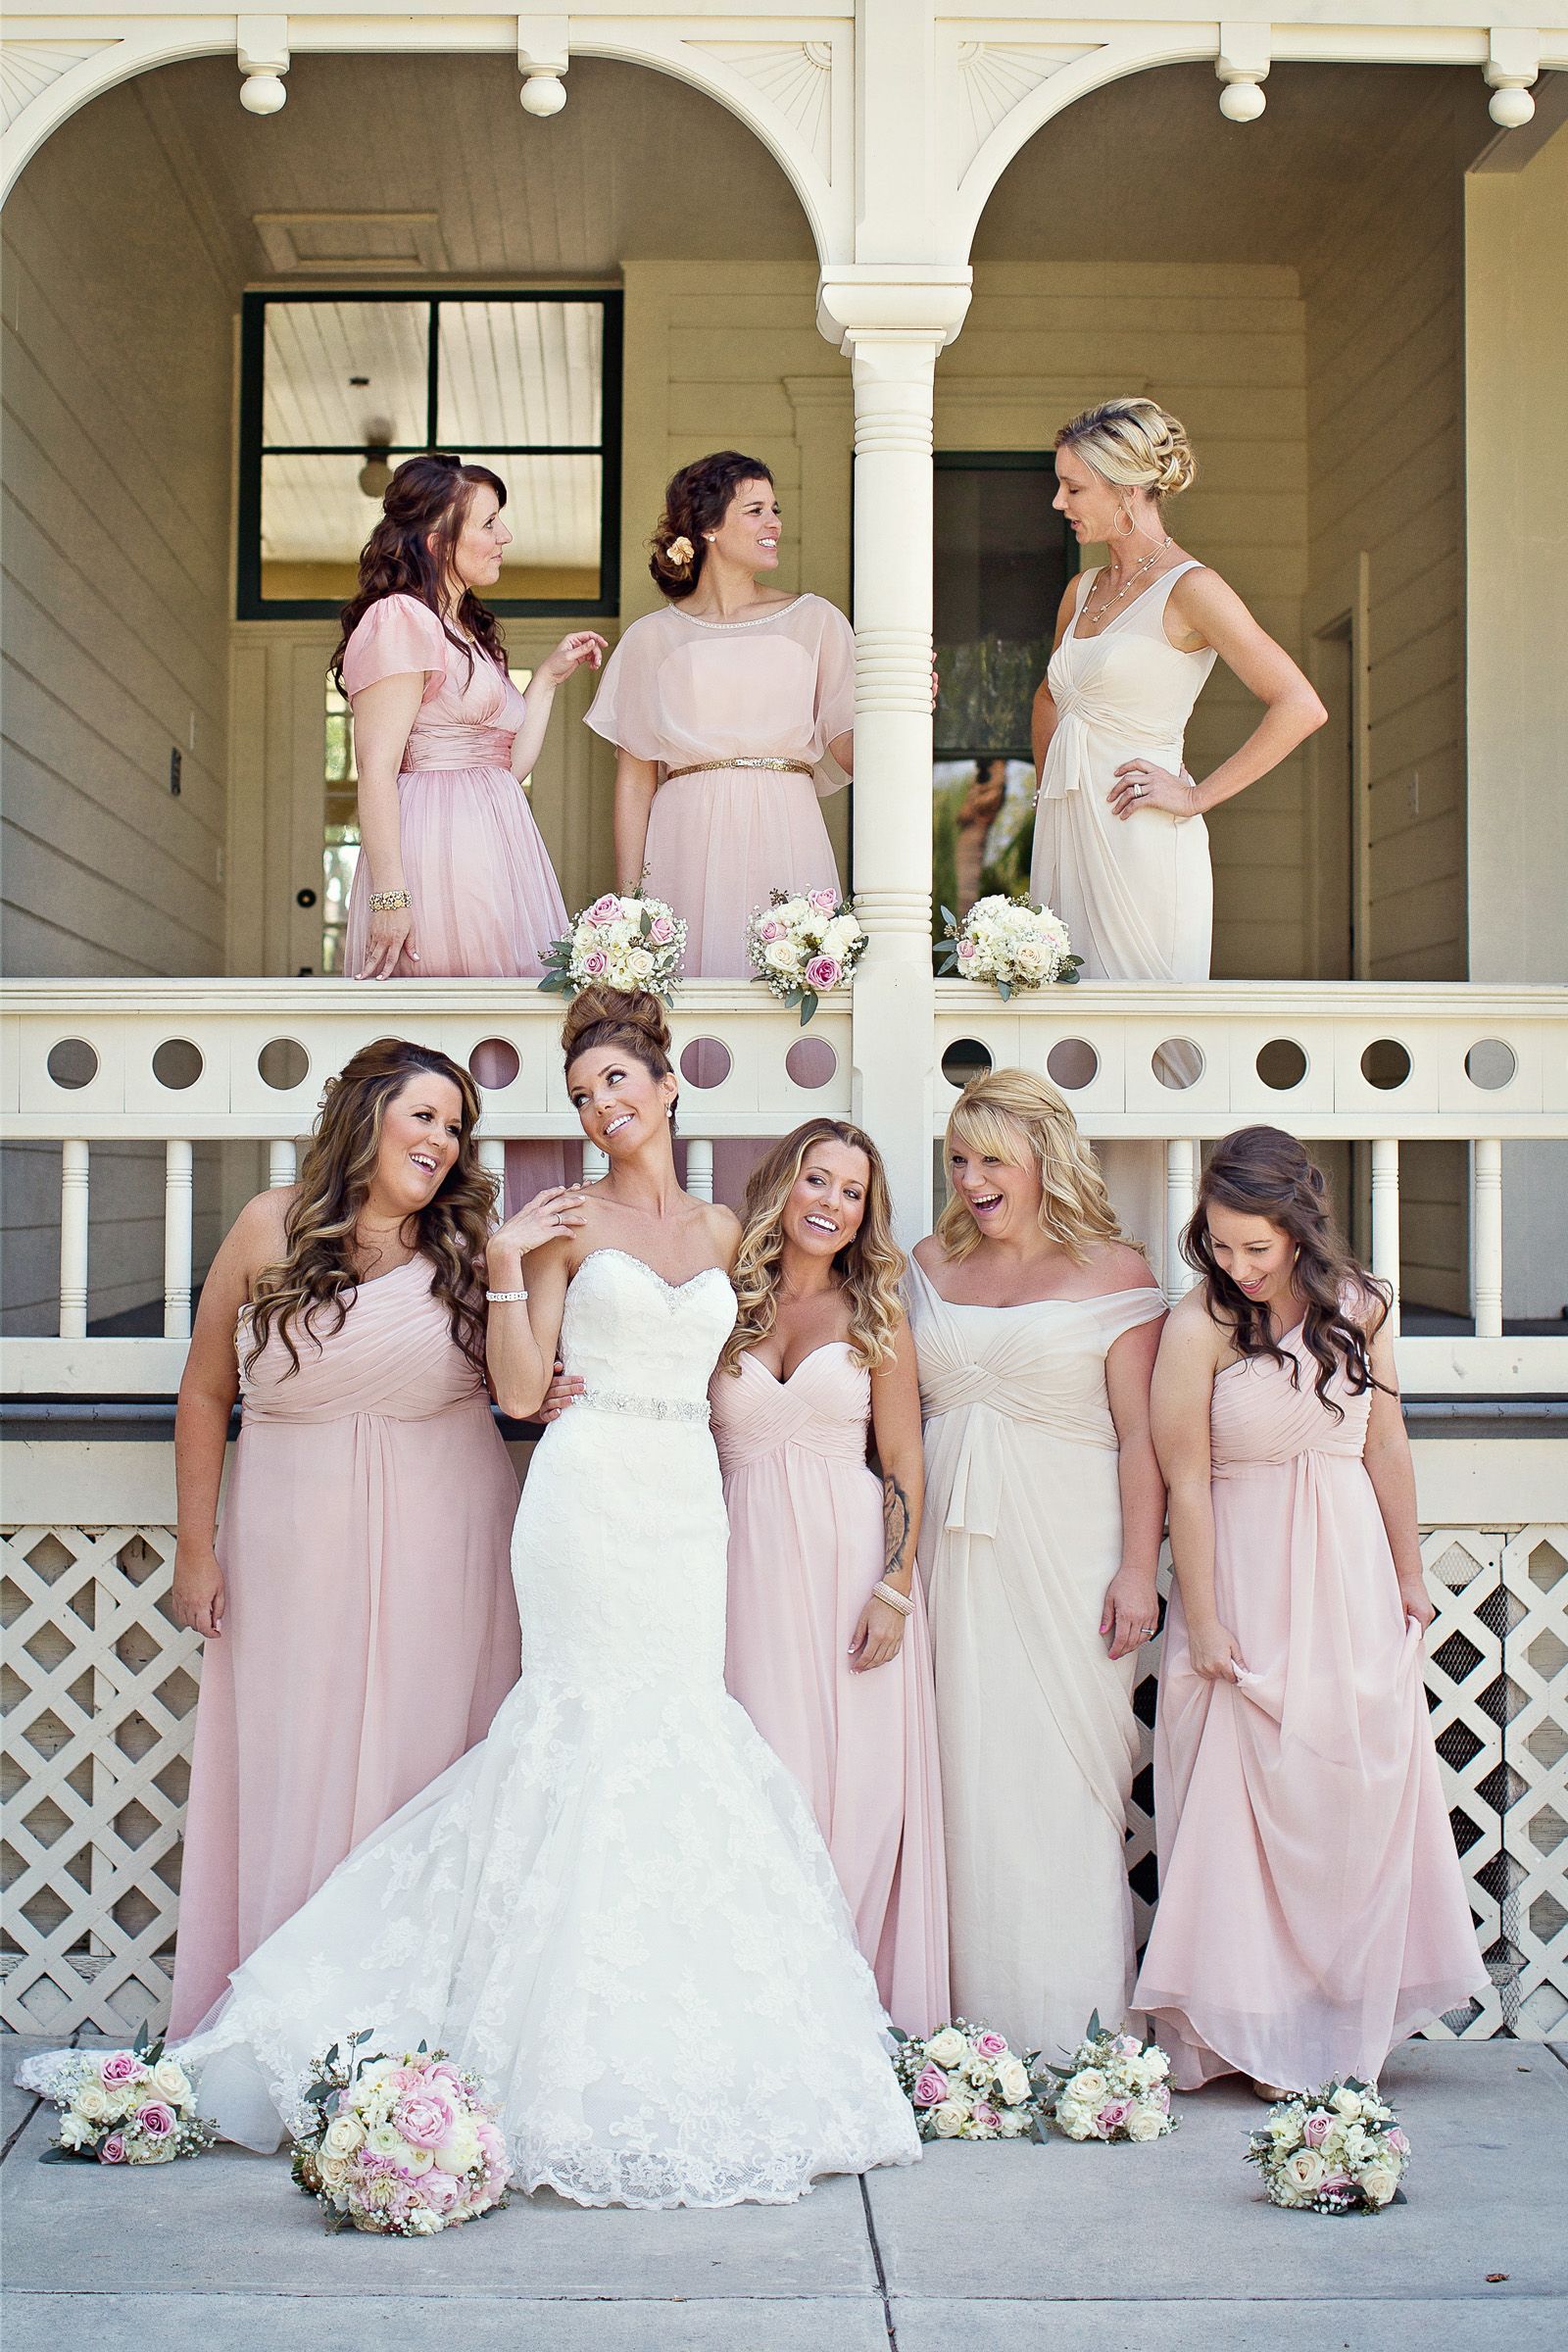 love the different shades of bridesmaids dresses. then the bridesmaids can choos